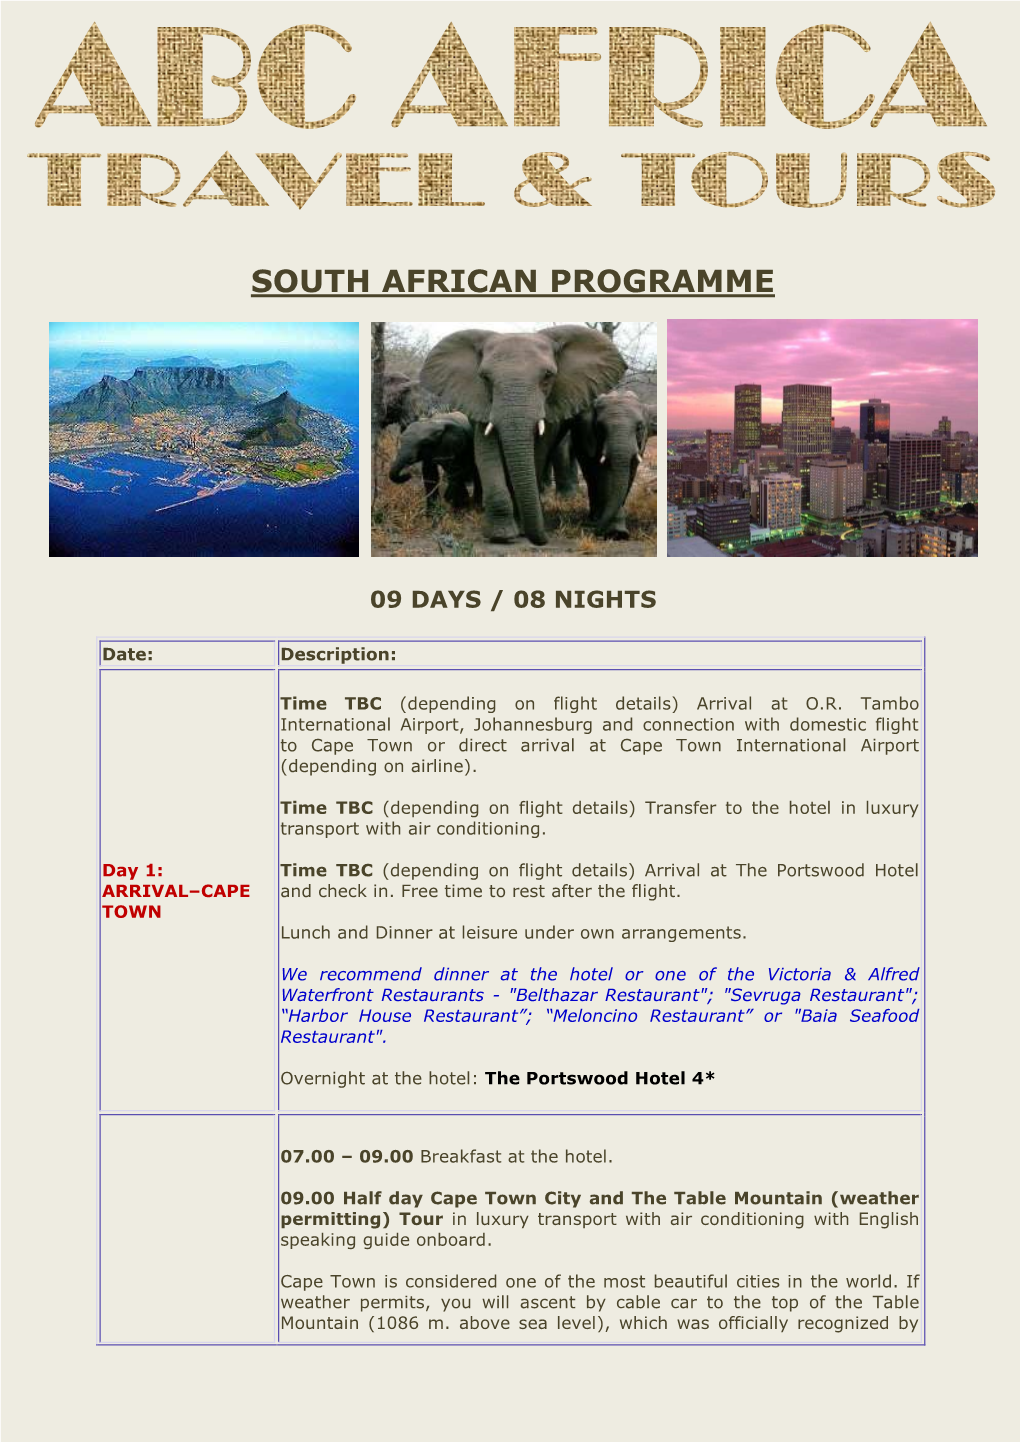 South African Programme